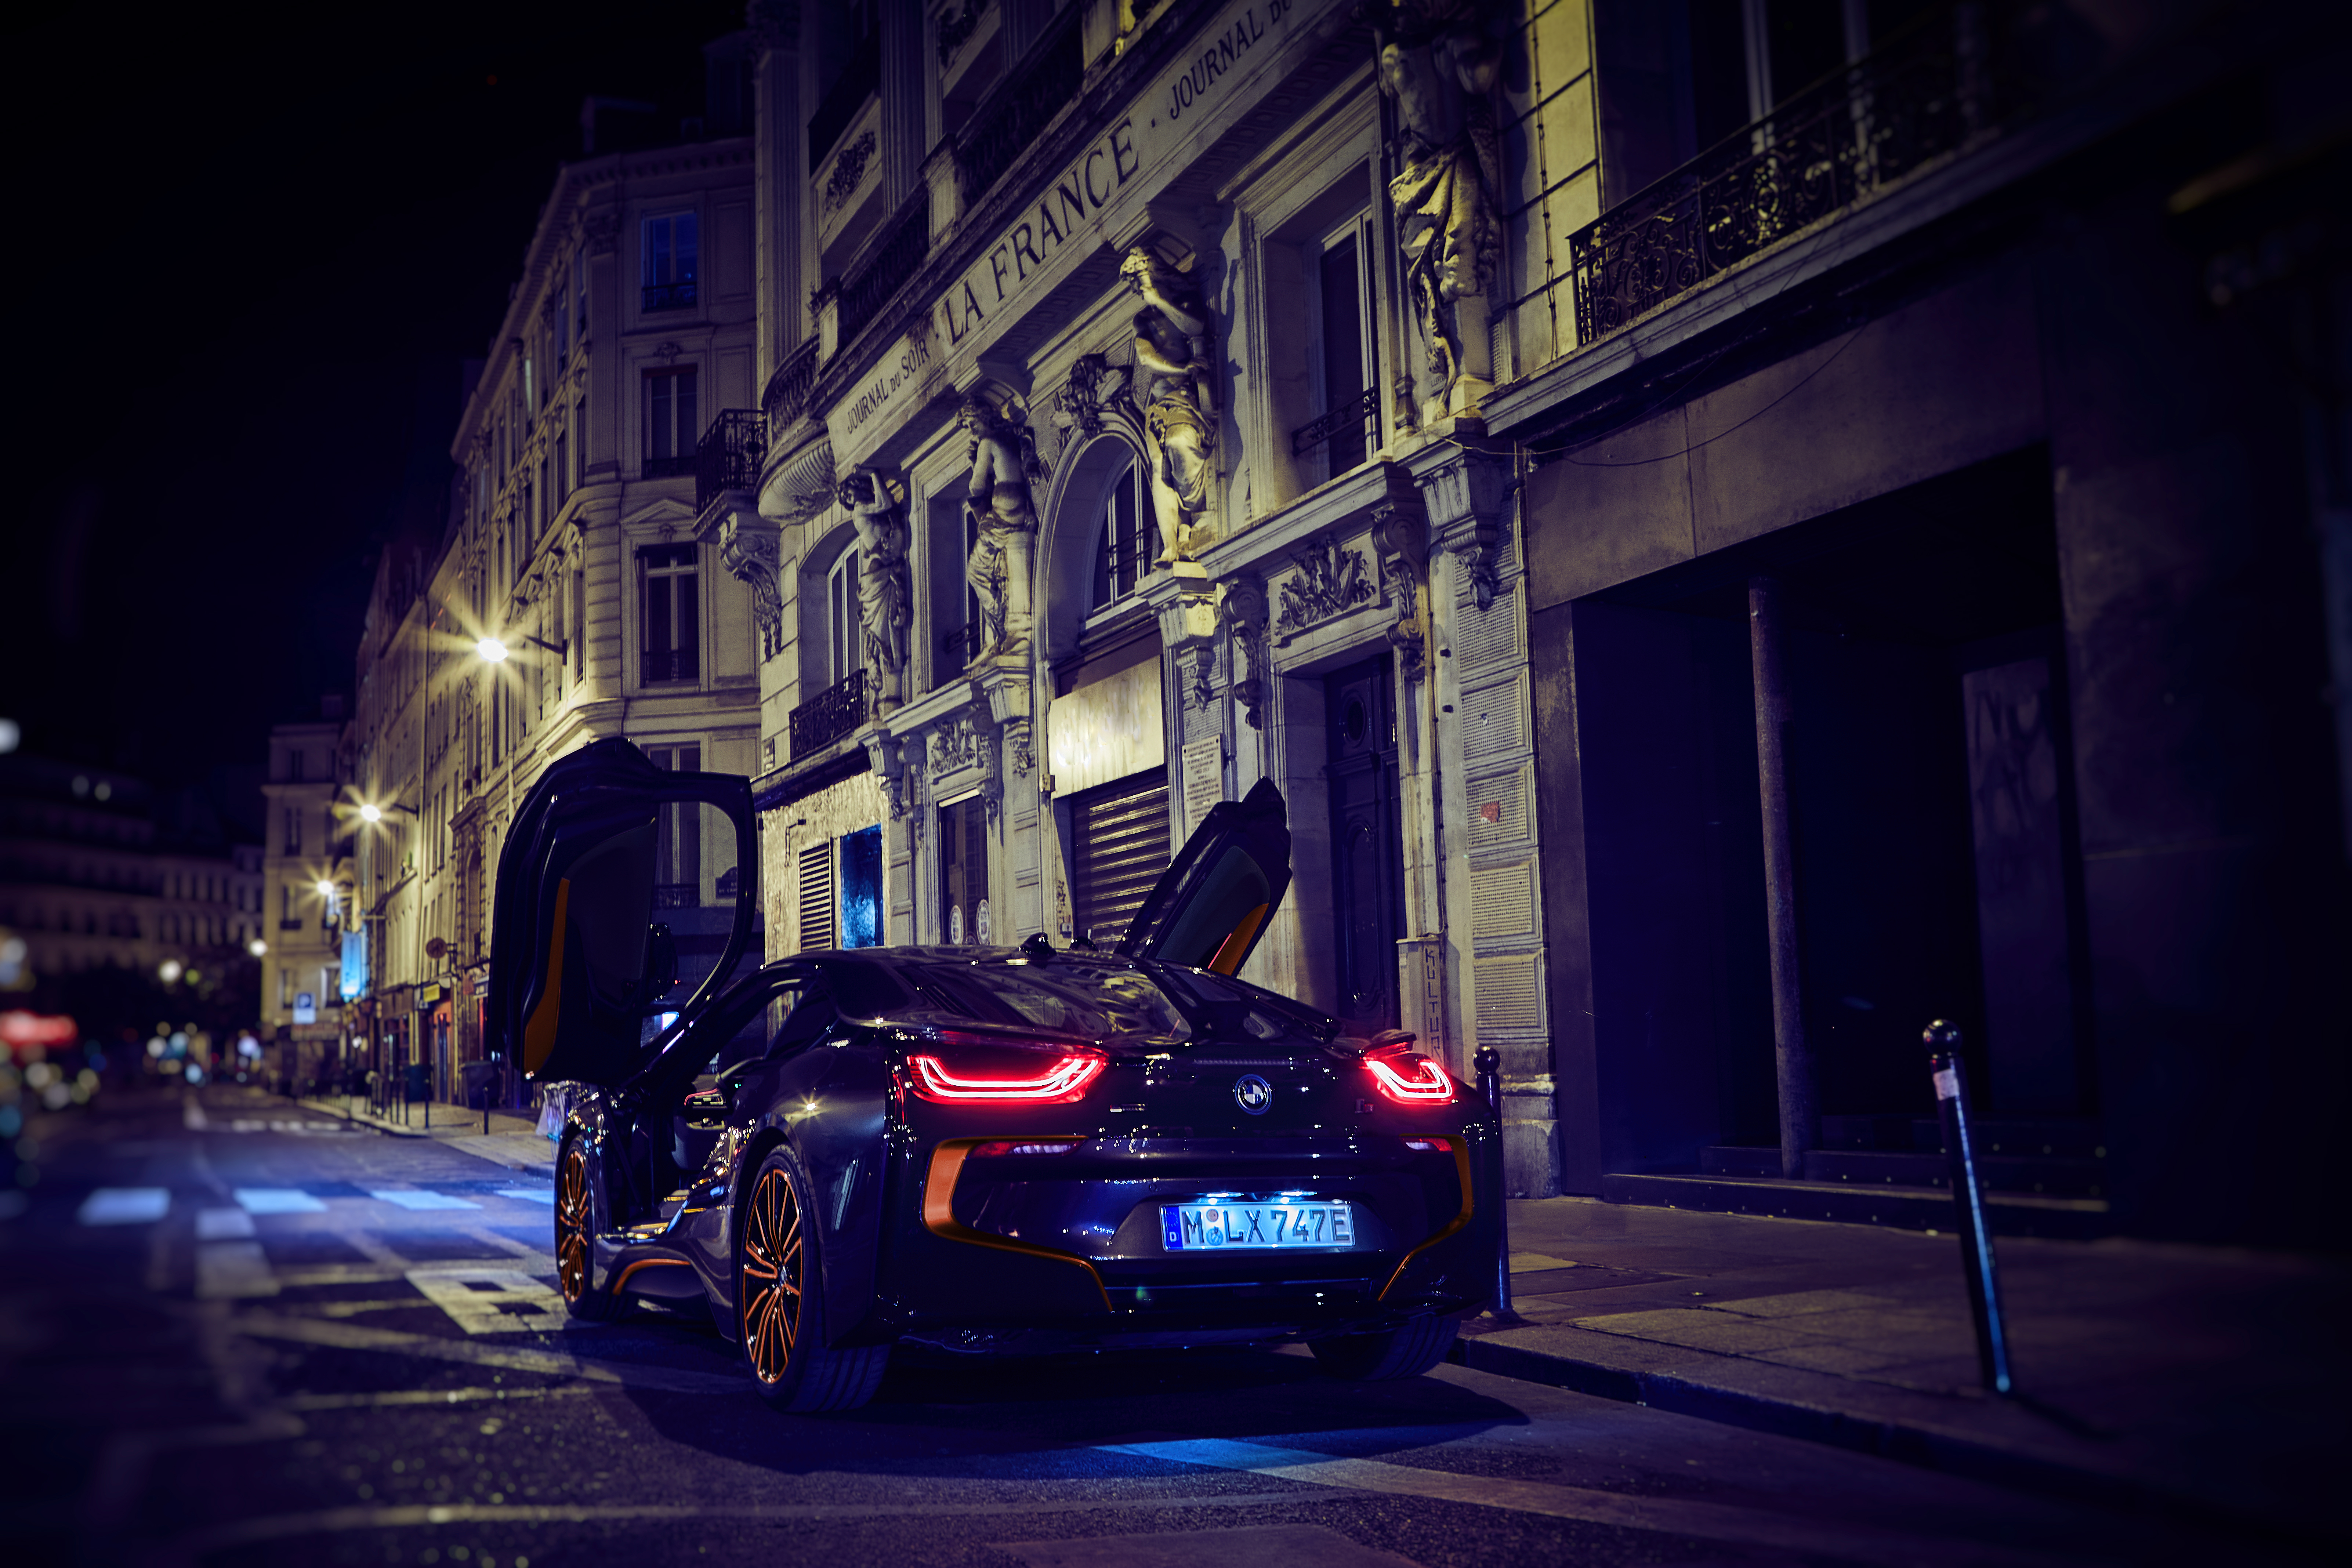 The BMW i3 Edition Roadstyle and i8 Ultimate Sophisto Edition